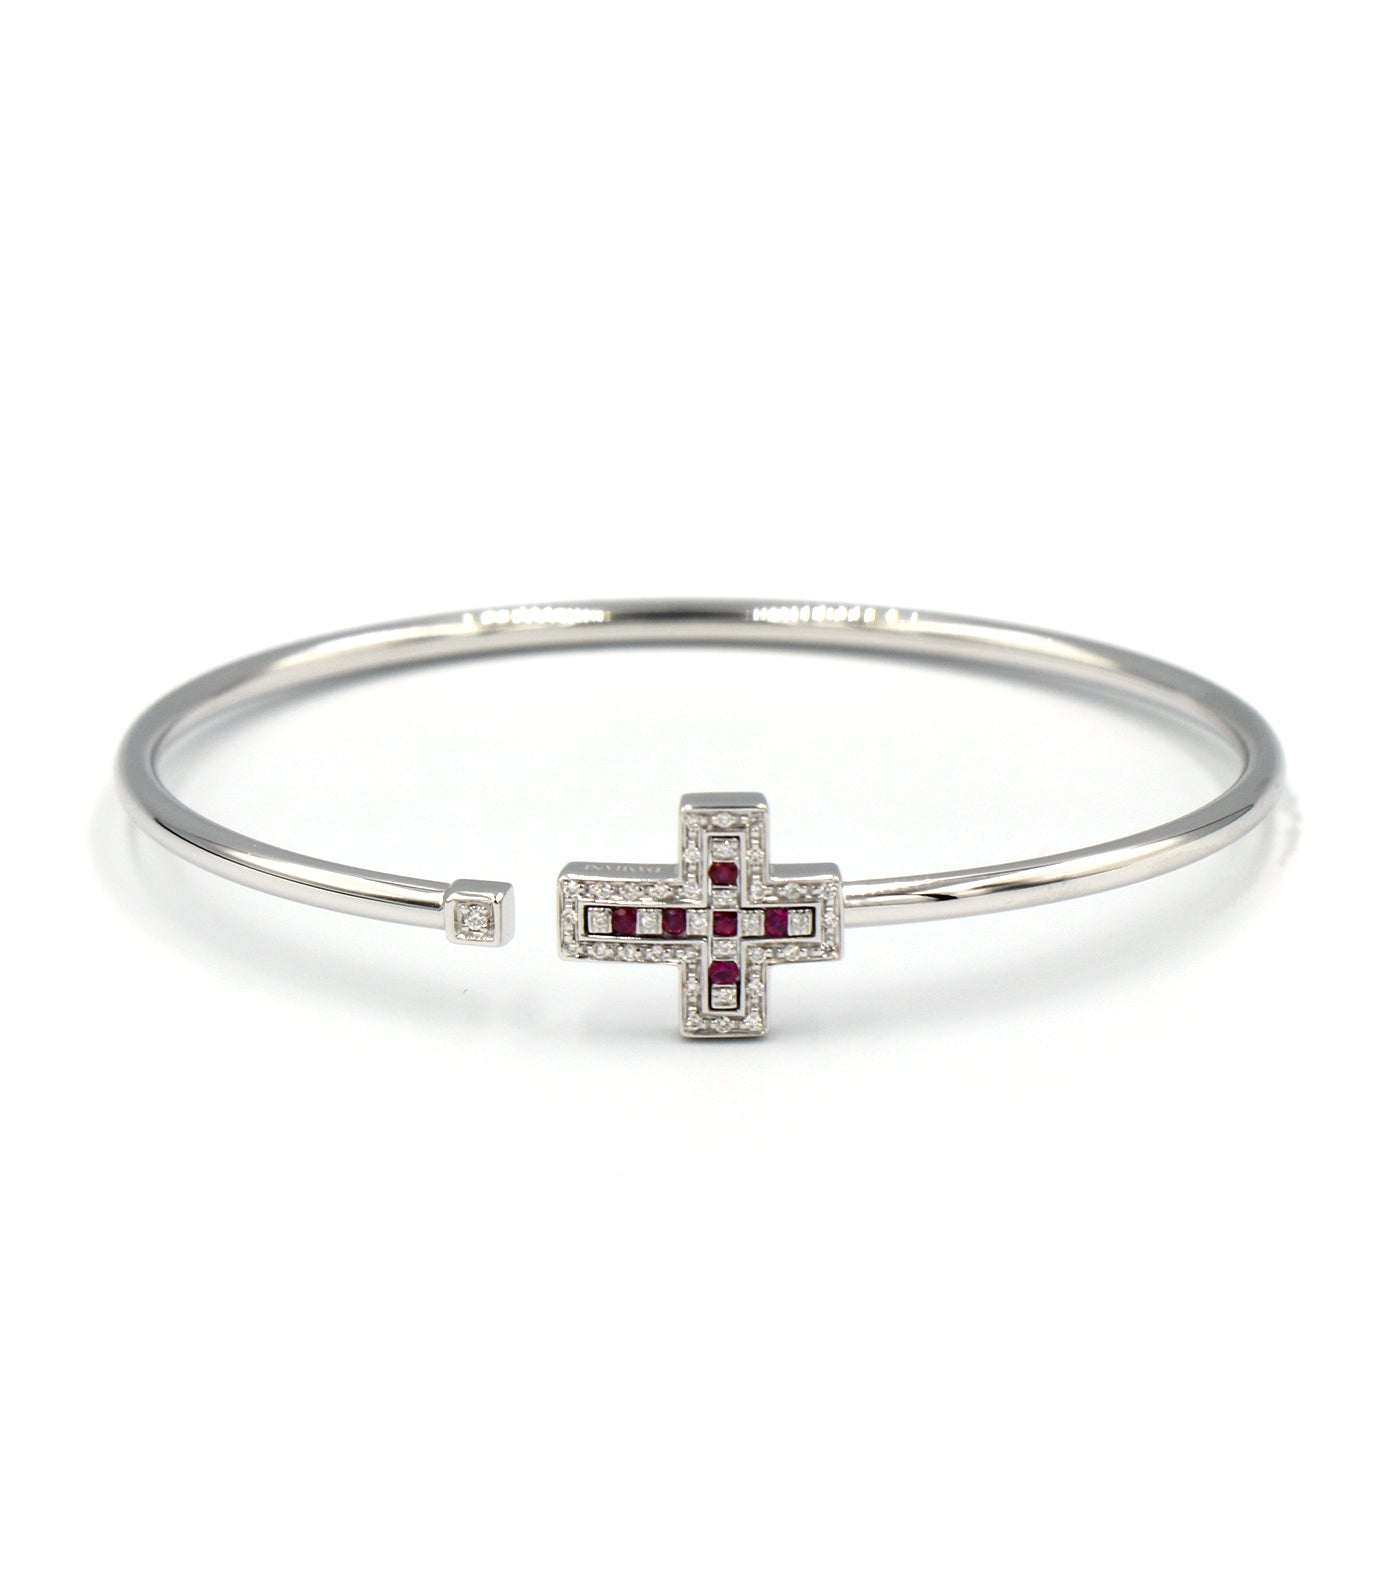 White Gold Cross Bracelet with Diamond and Ruby